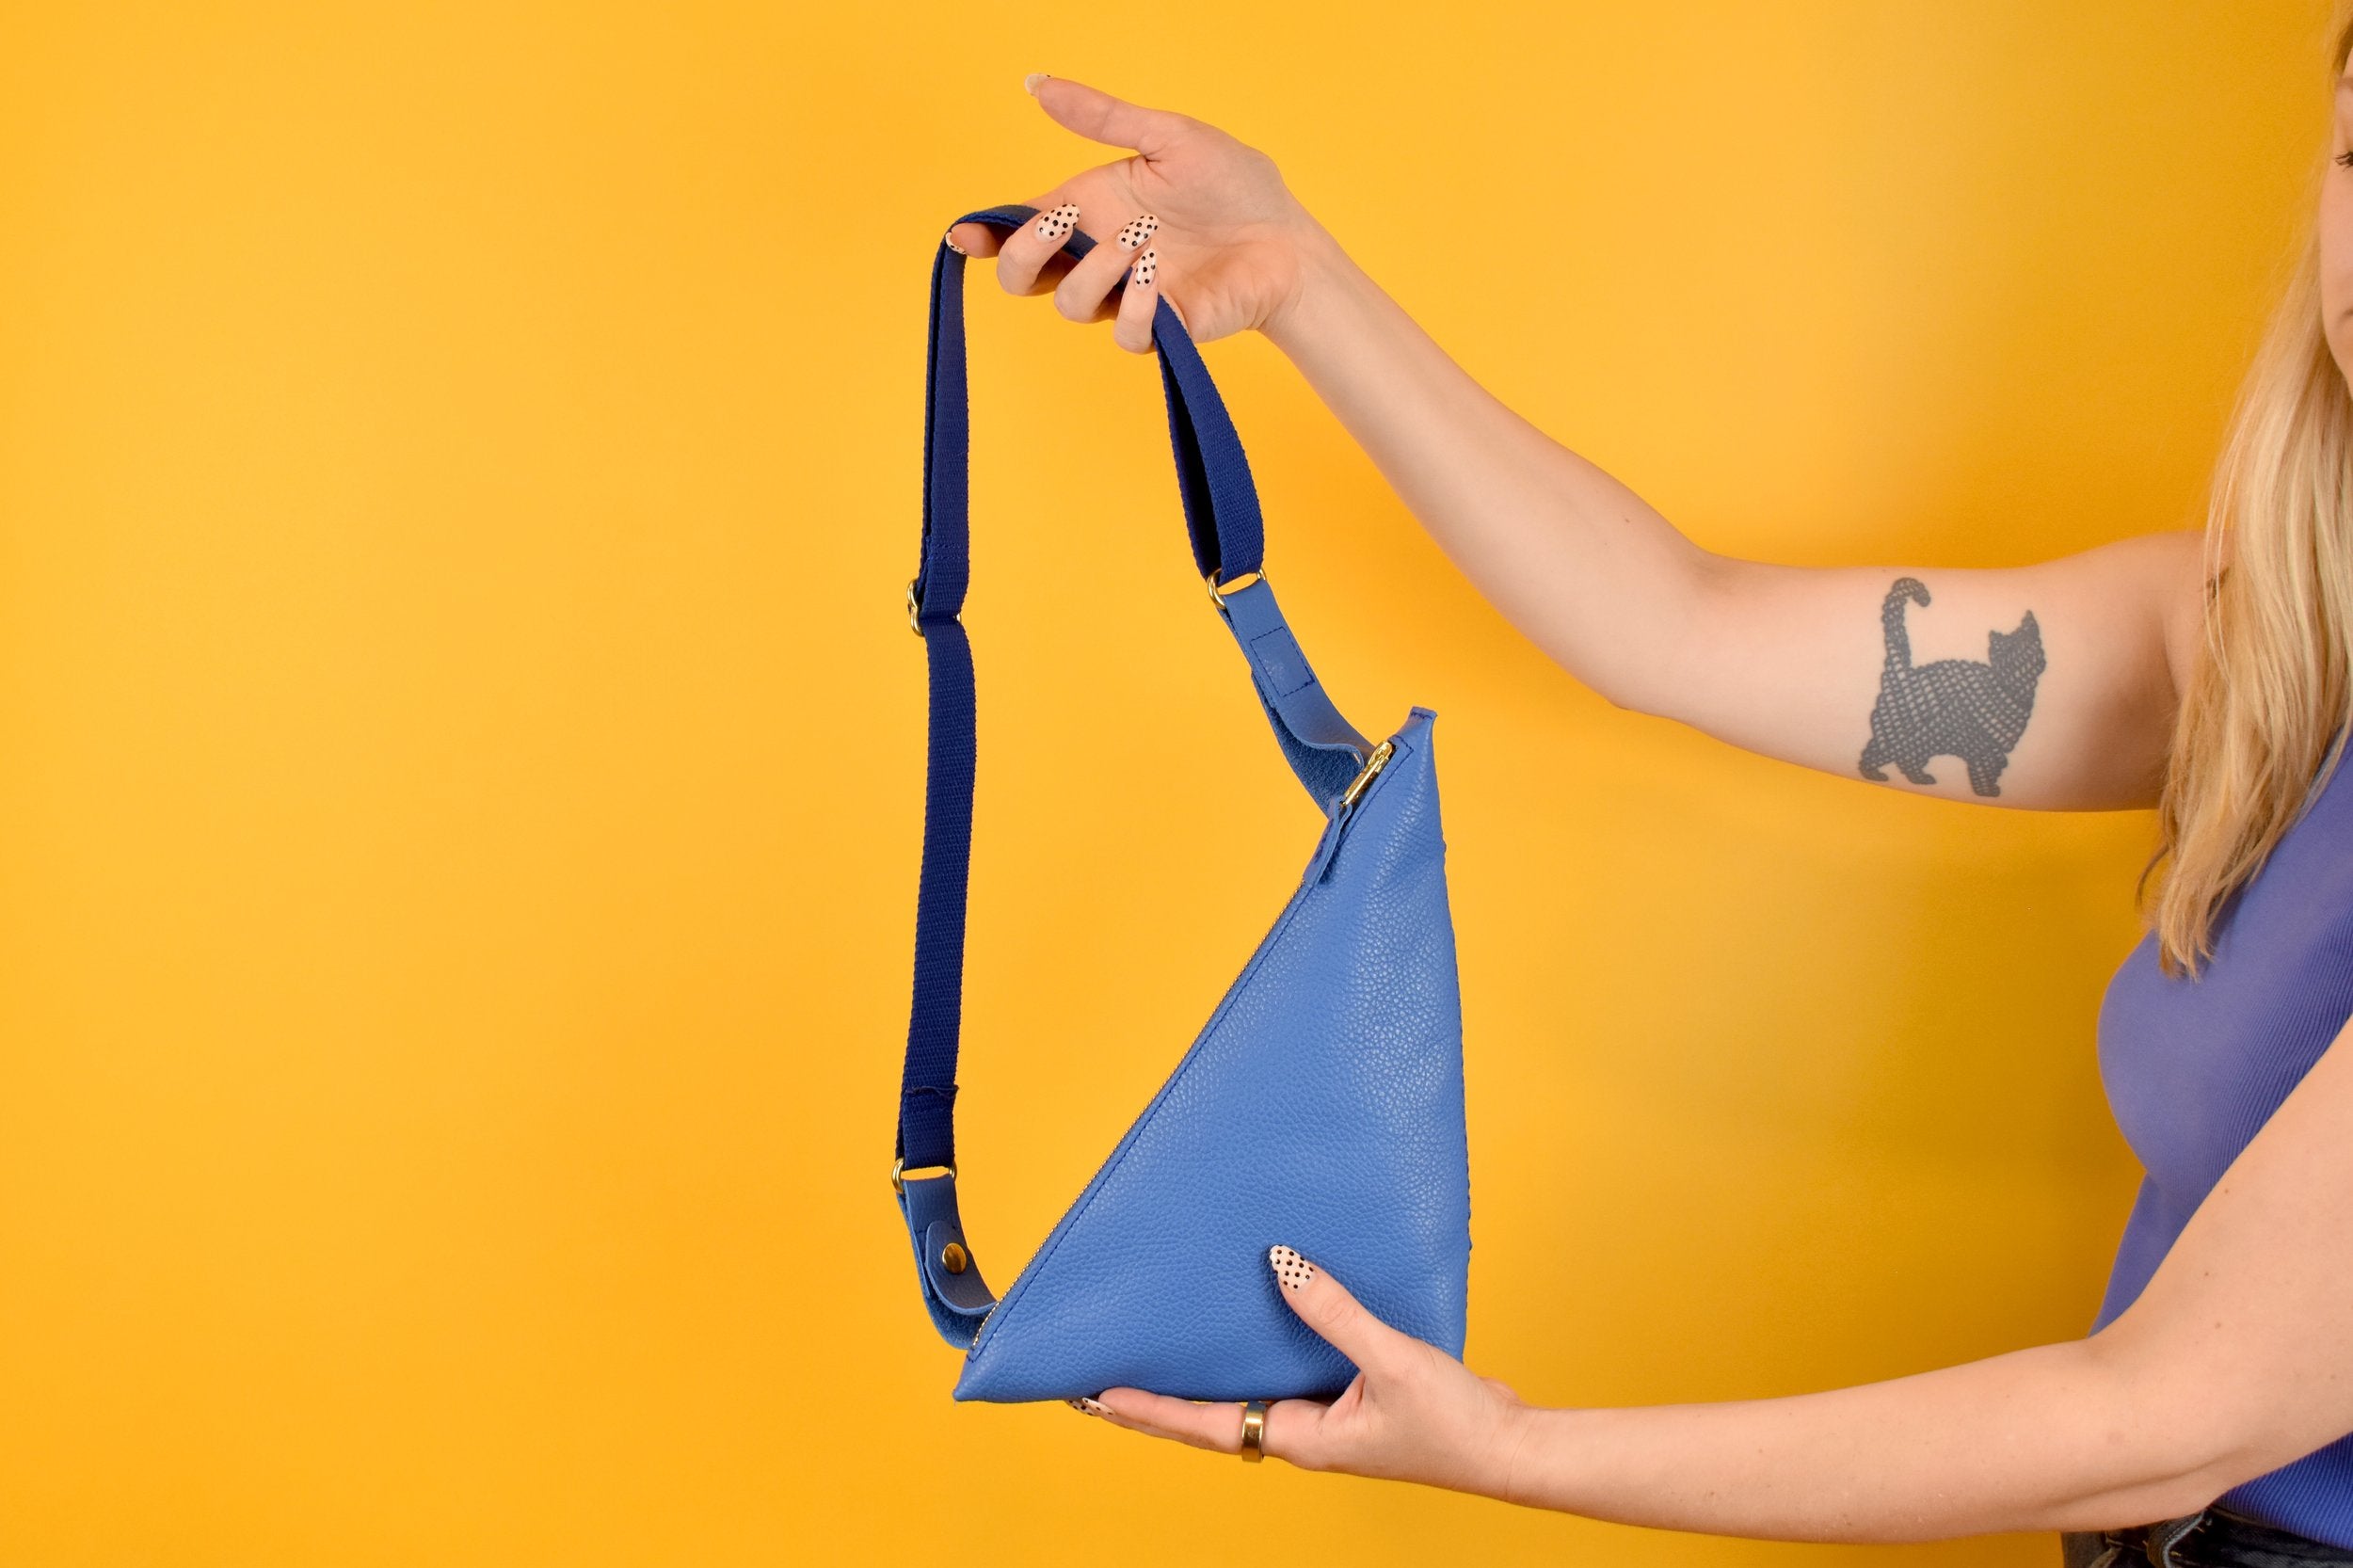 a pair of hands shown holding a matisse style sling bag purse in leather blue as a crossbody outdoor hiking bag